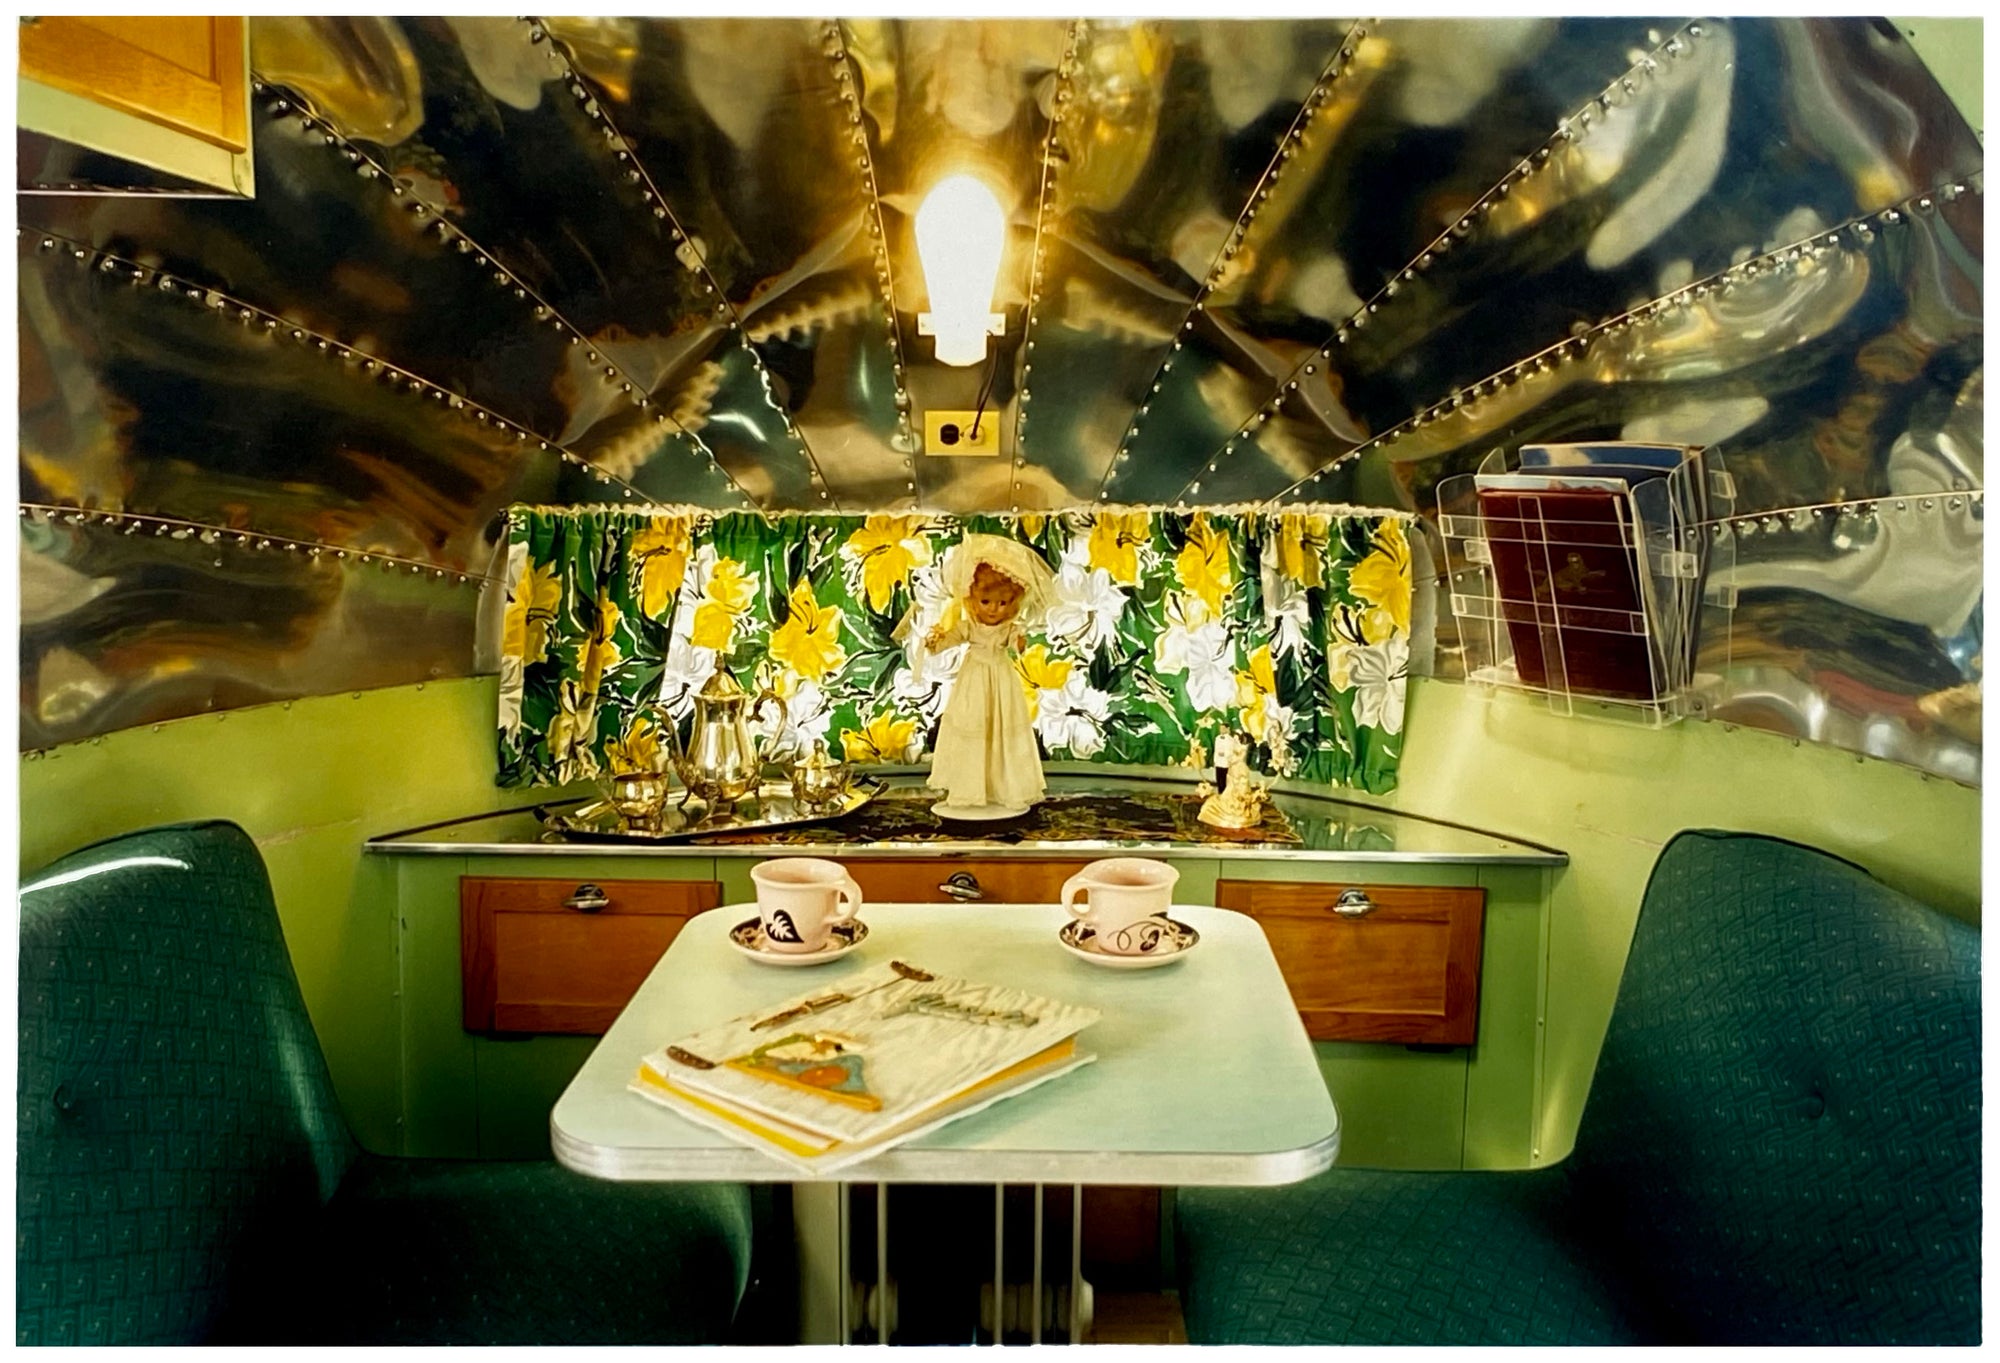 Photograph by Richard Heeps. Inside a trailer, there is a fixed table and chairs with two tea cups and saucers on the table. Behind on the shelf is a tea set and a doll dressed as a bride.